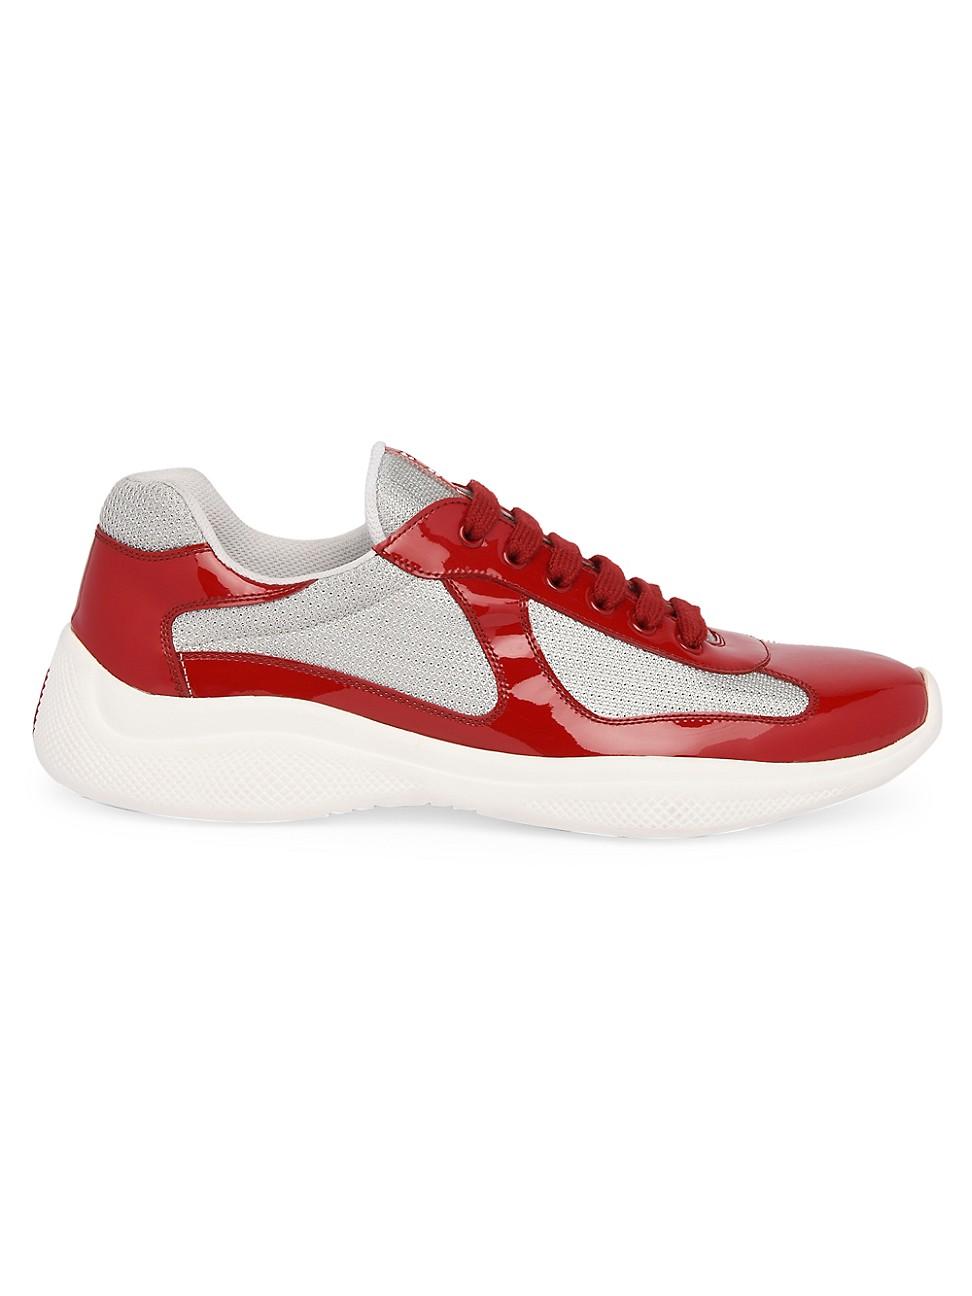 Prada Men's Shoes Leather Trainers Sneakers in Red for Men - Save 71% | Lyst